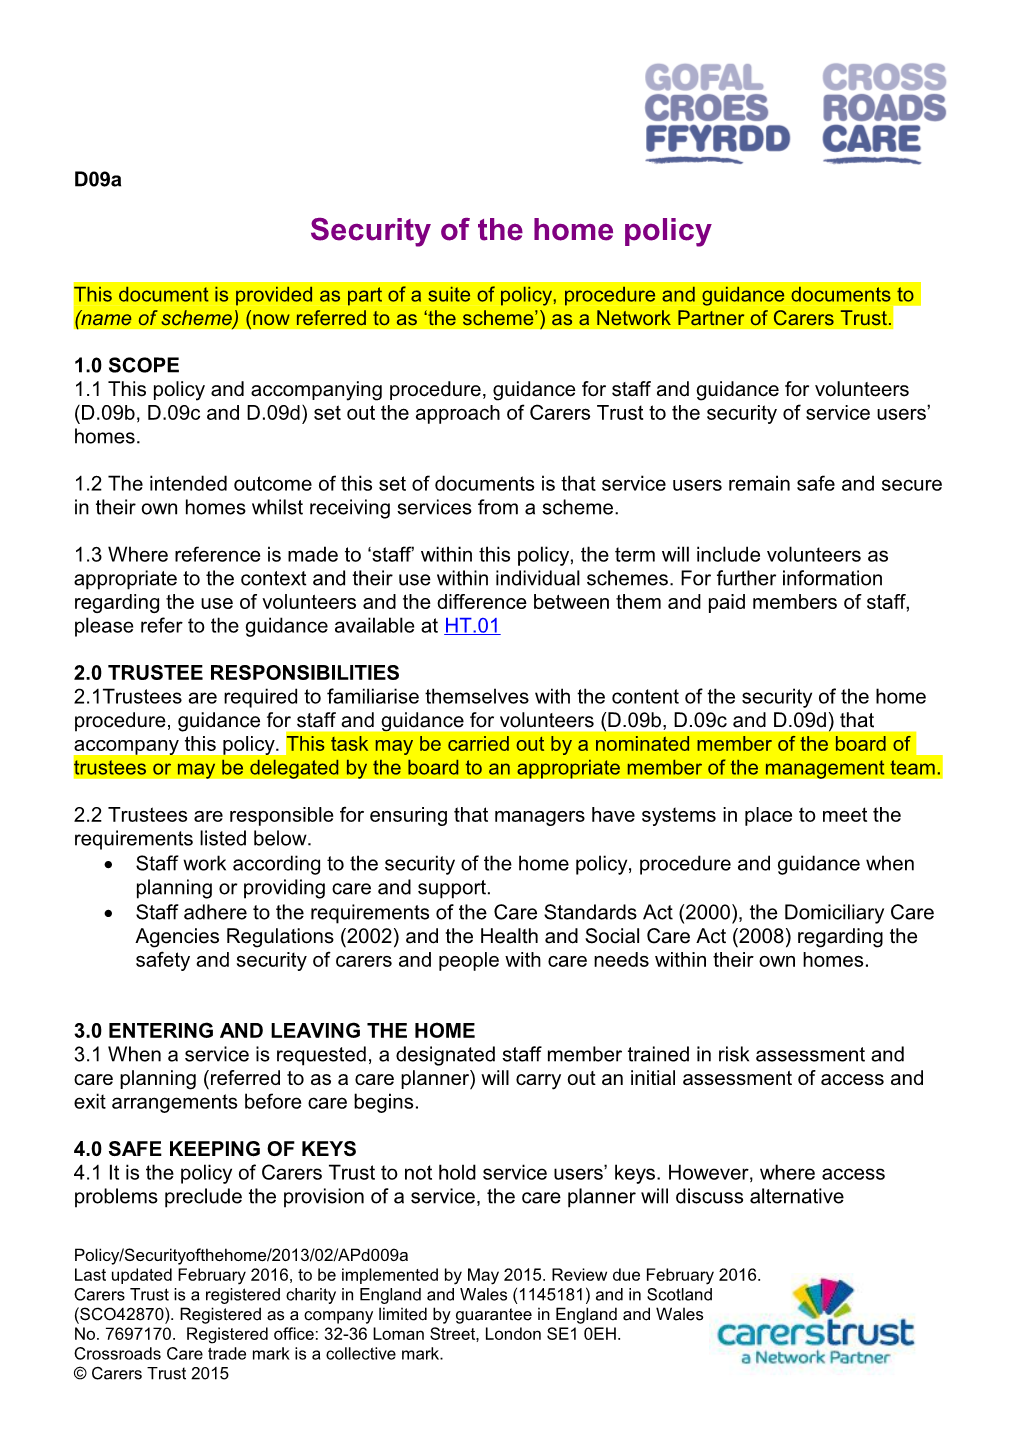 Crossroads Care Security of the Home Policy